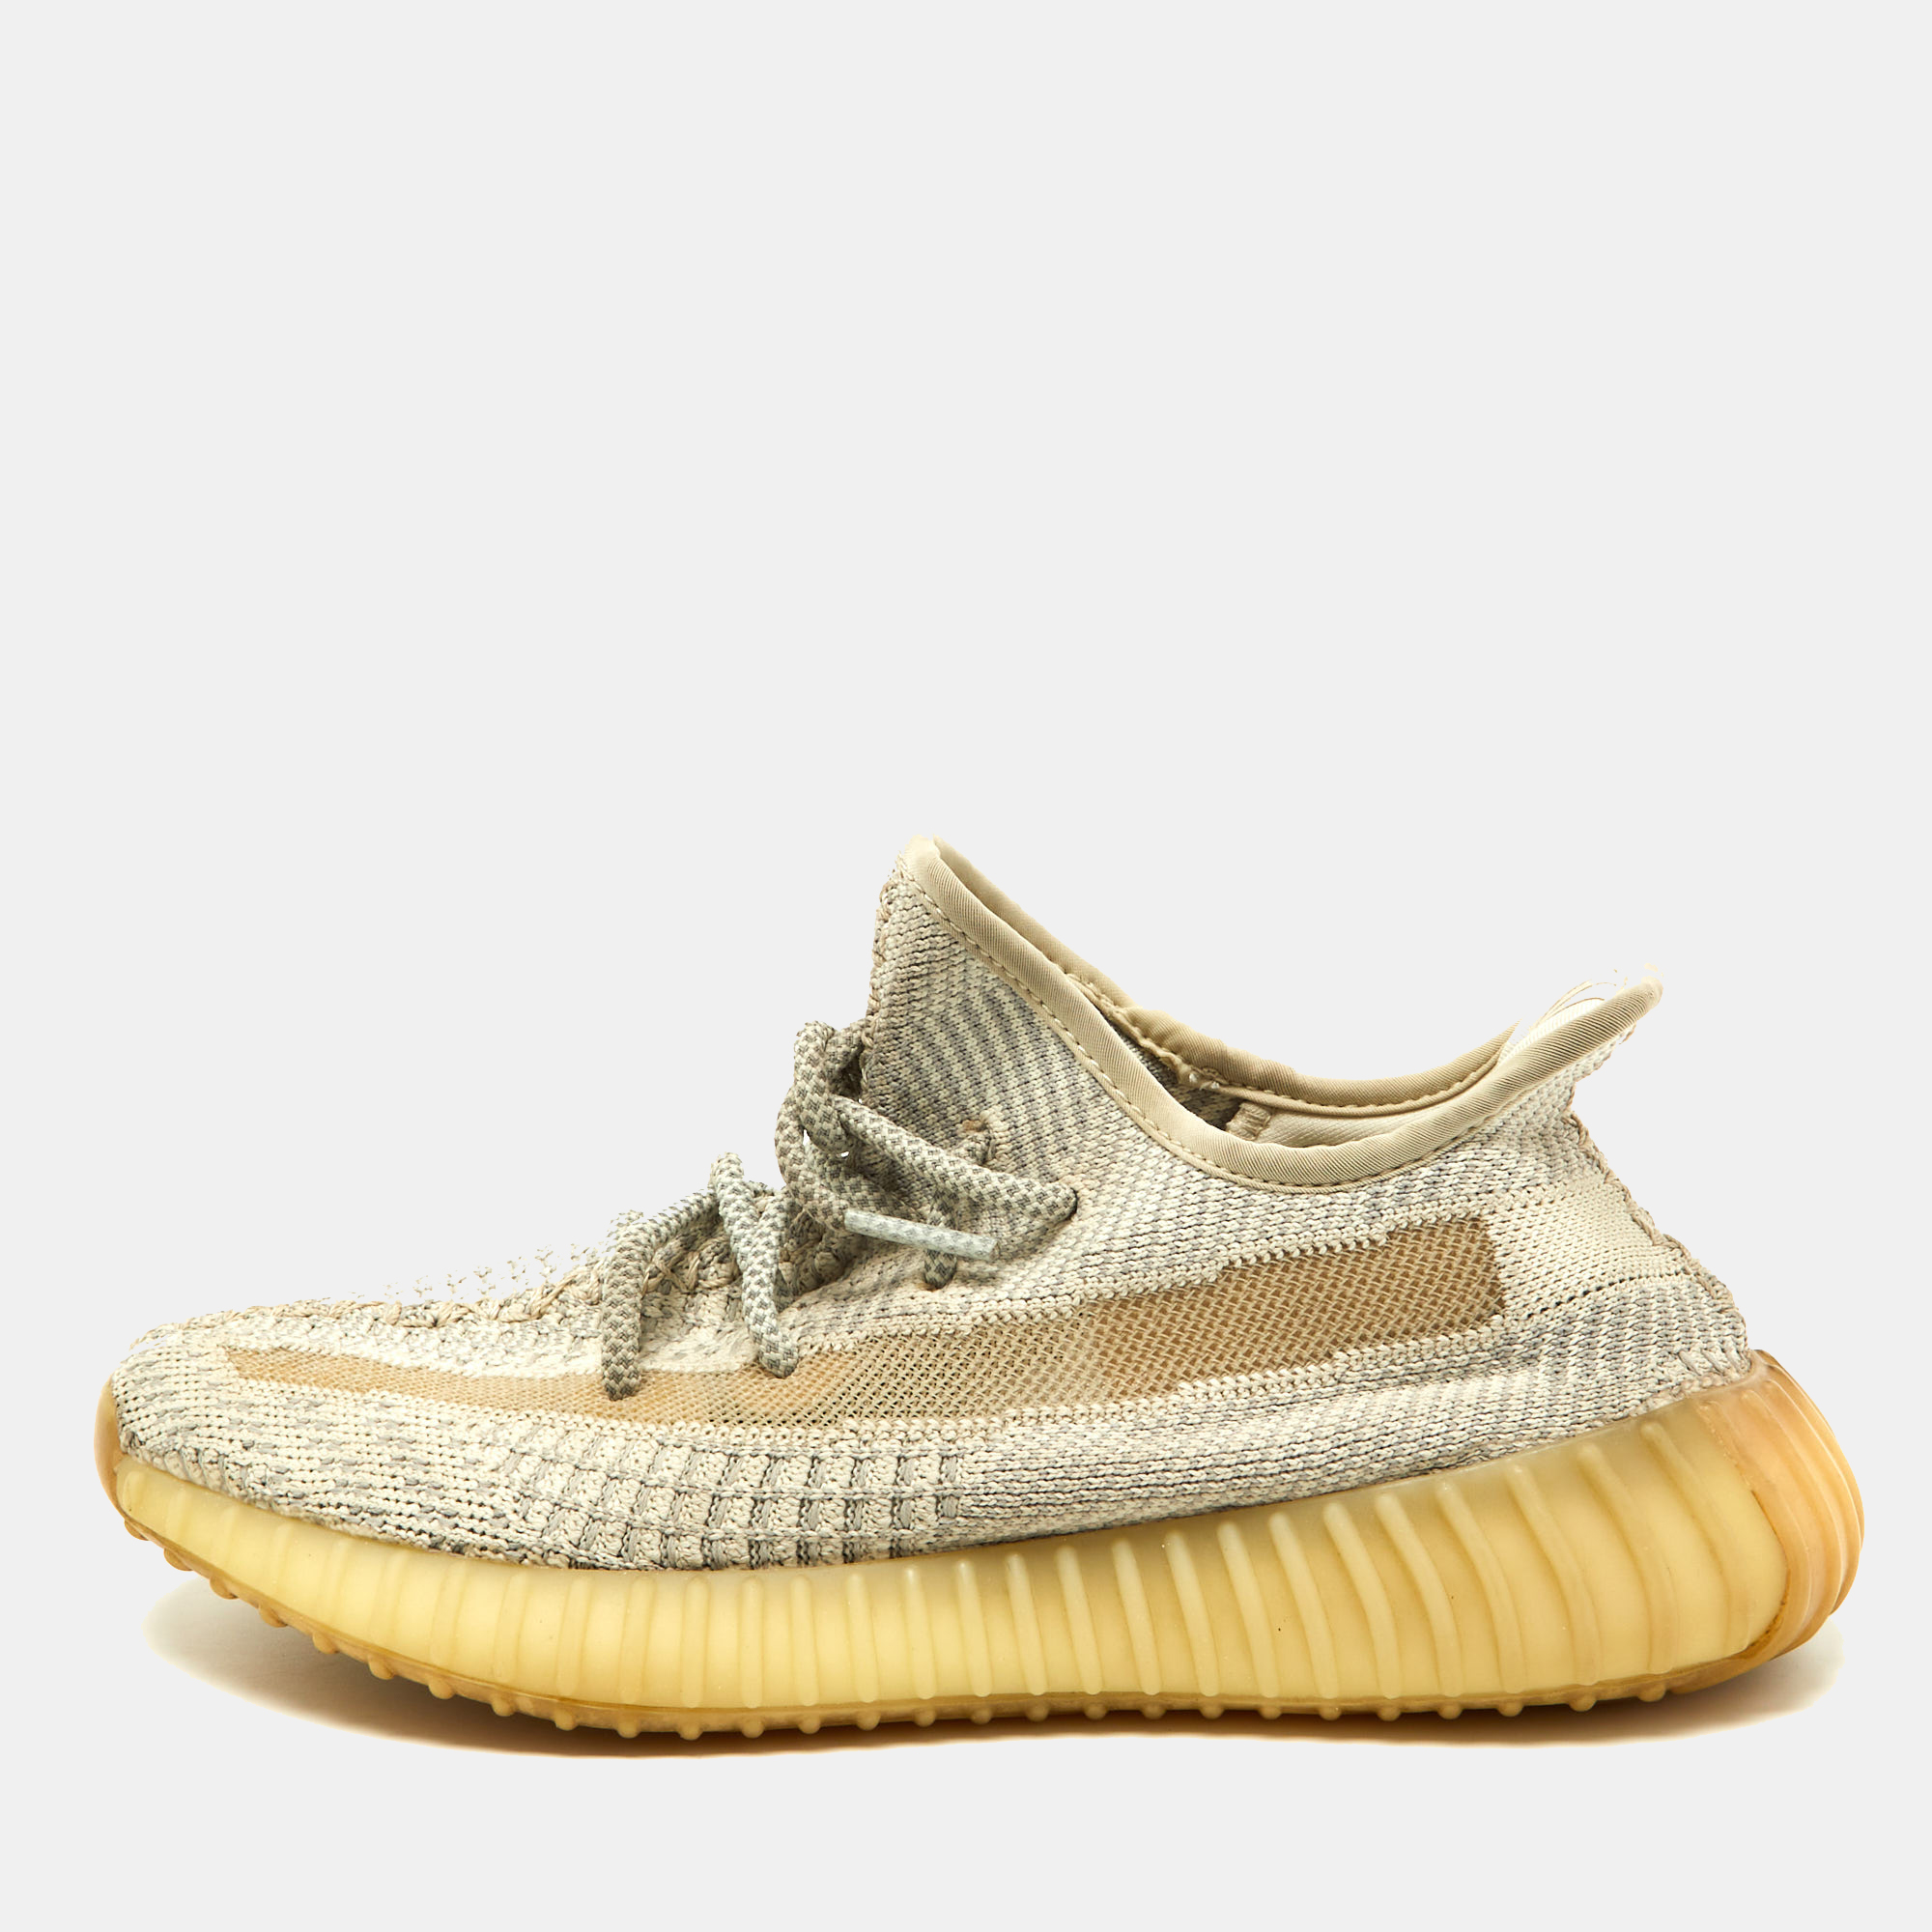 Catch on with the trend of designs from the Yeezy x Adidas collaboration with this pair of Boost 350 V2 sneakers. The knit fabric pair features great cushioning lace ups on the vamps and tough rubber soles. This pair comes in beige with the signature stripe detailing on the side.